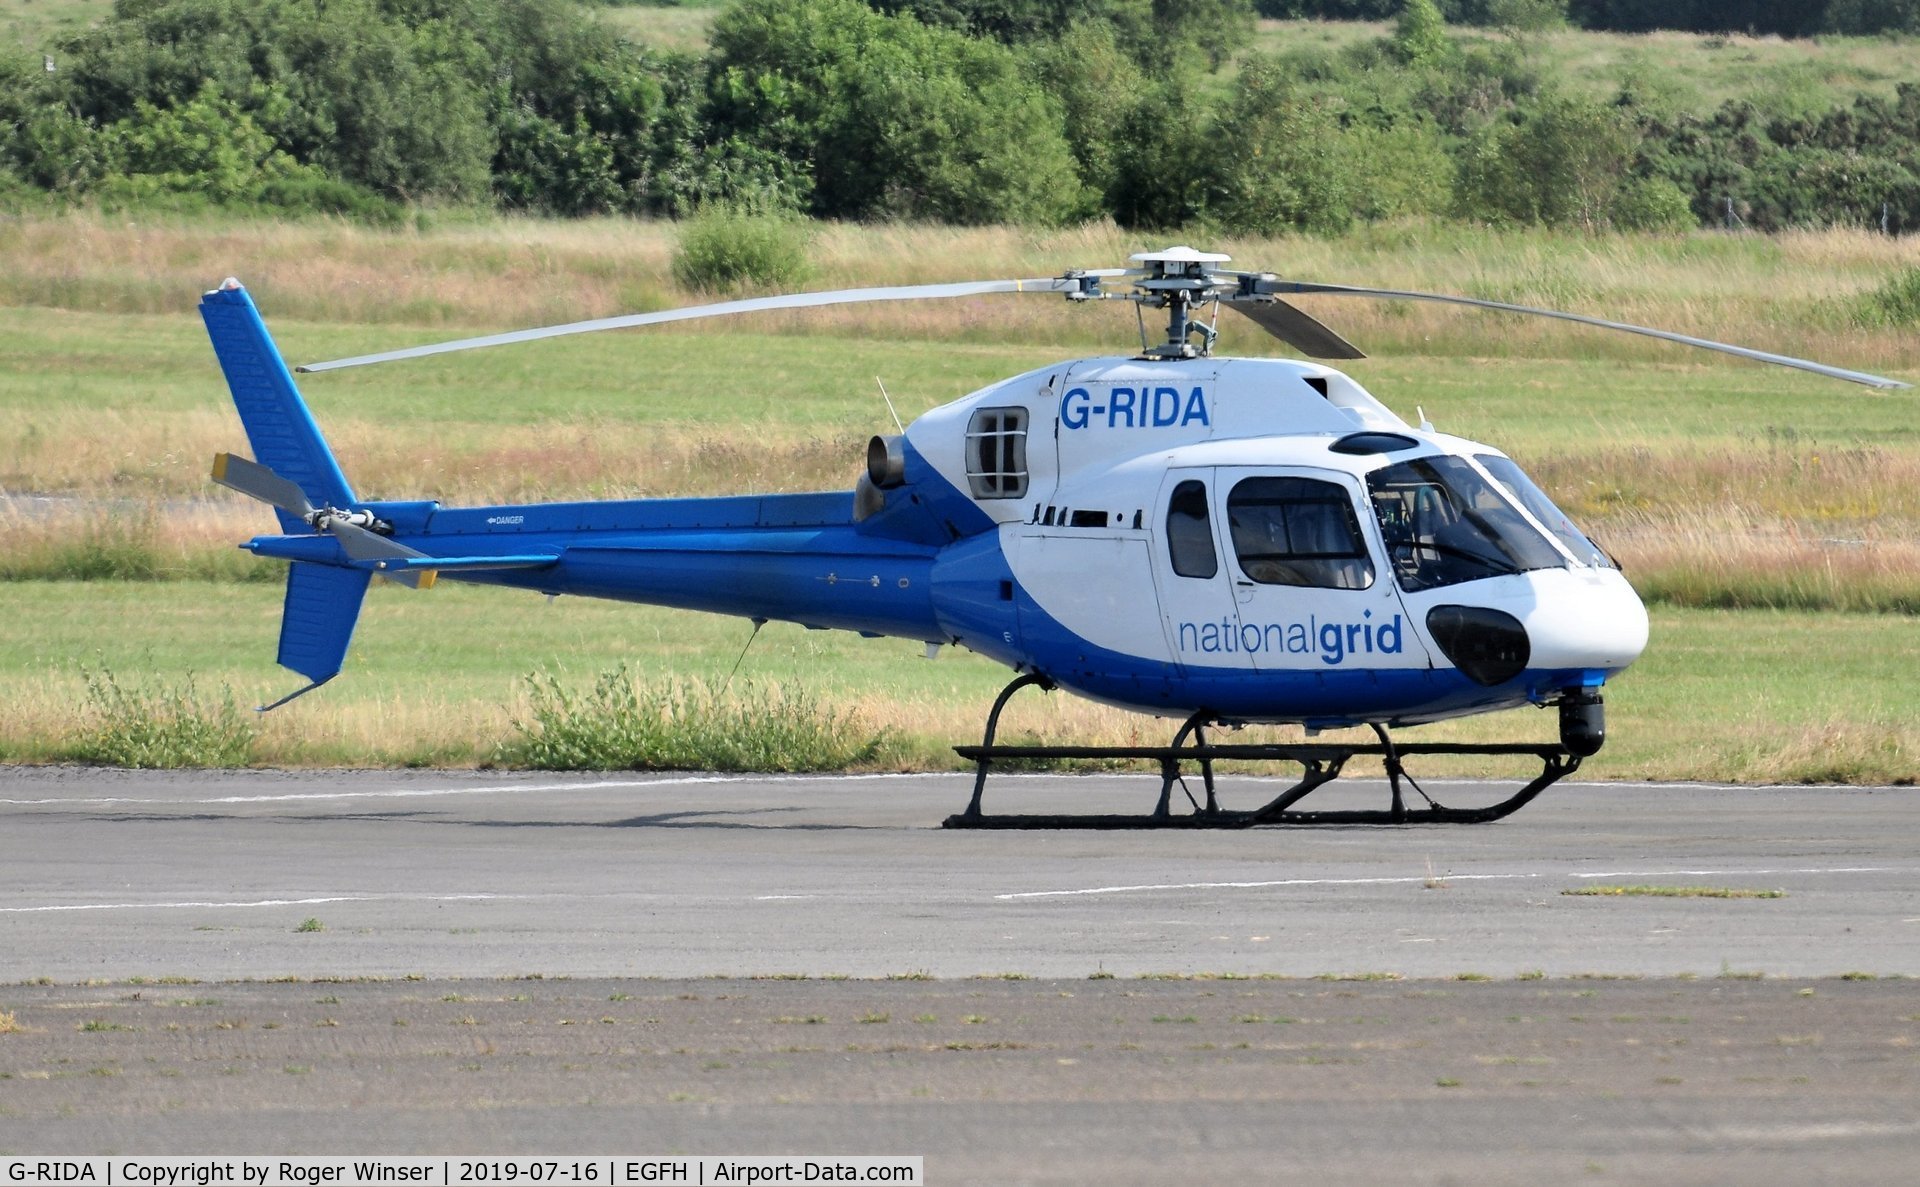 G-RIDA, 2007 Eurocopter AS-355NP Ecureuil 2 C/N 5734, Visiting Ecureuil 2 operated by National Grid.